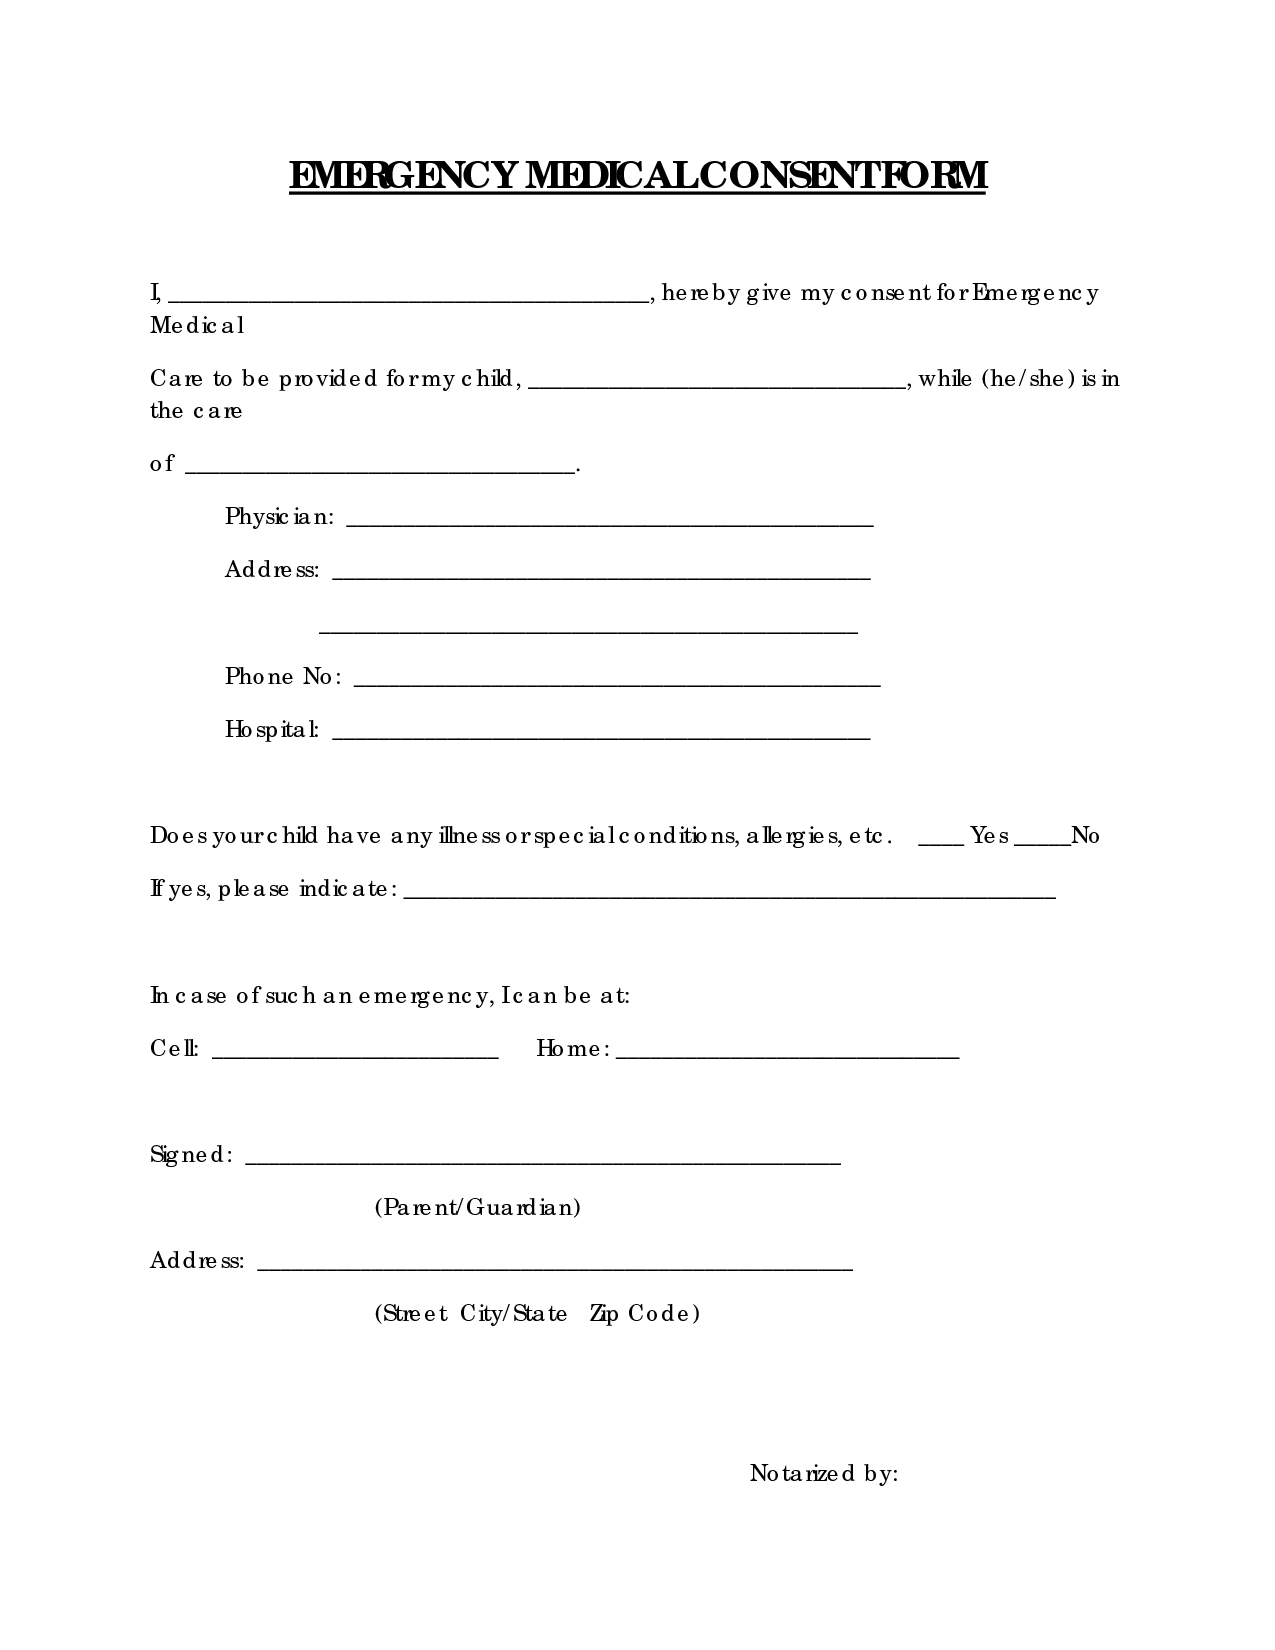 Free Printable Medical Consent Form | Emergency Medical Consent Form - Free Printable Medical Consent Form